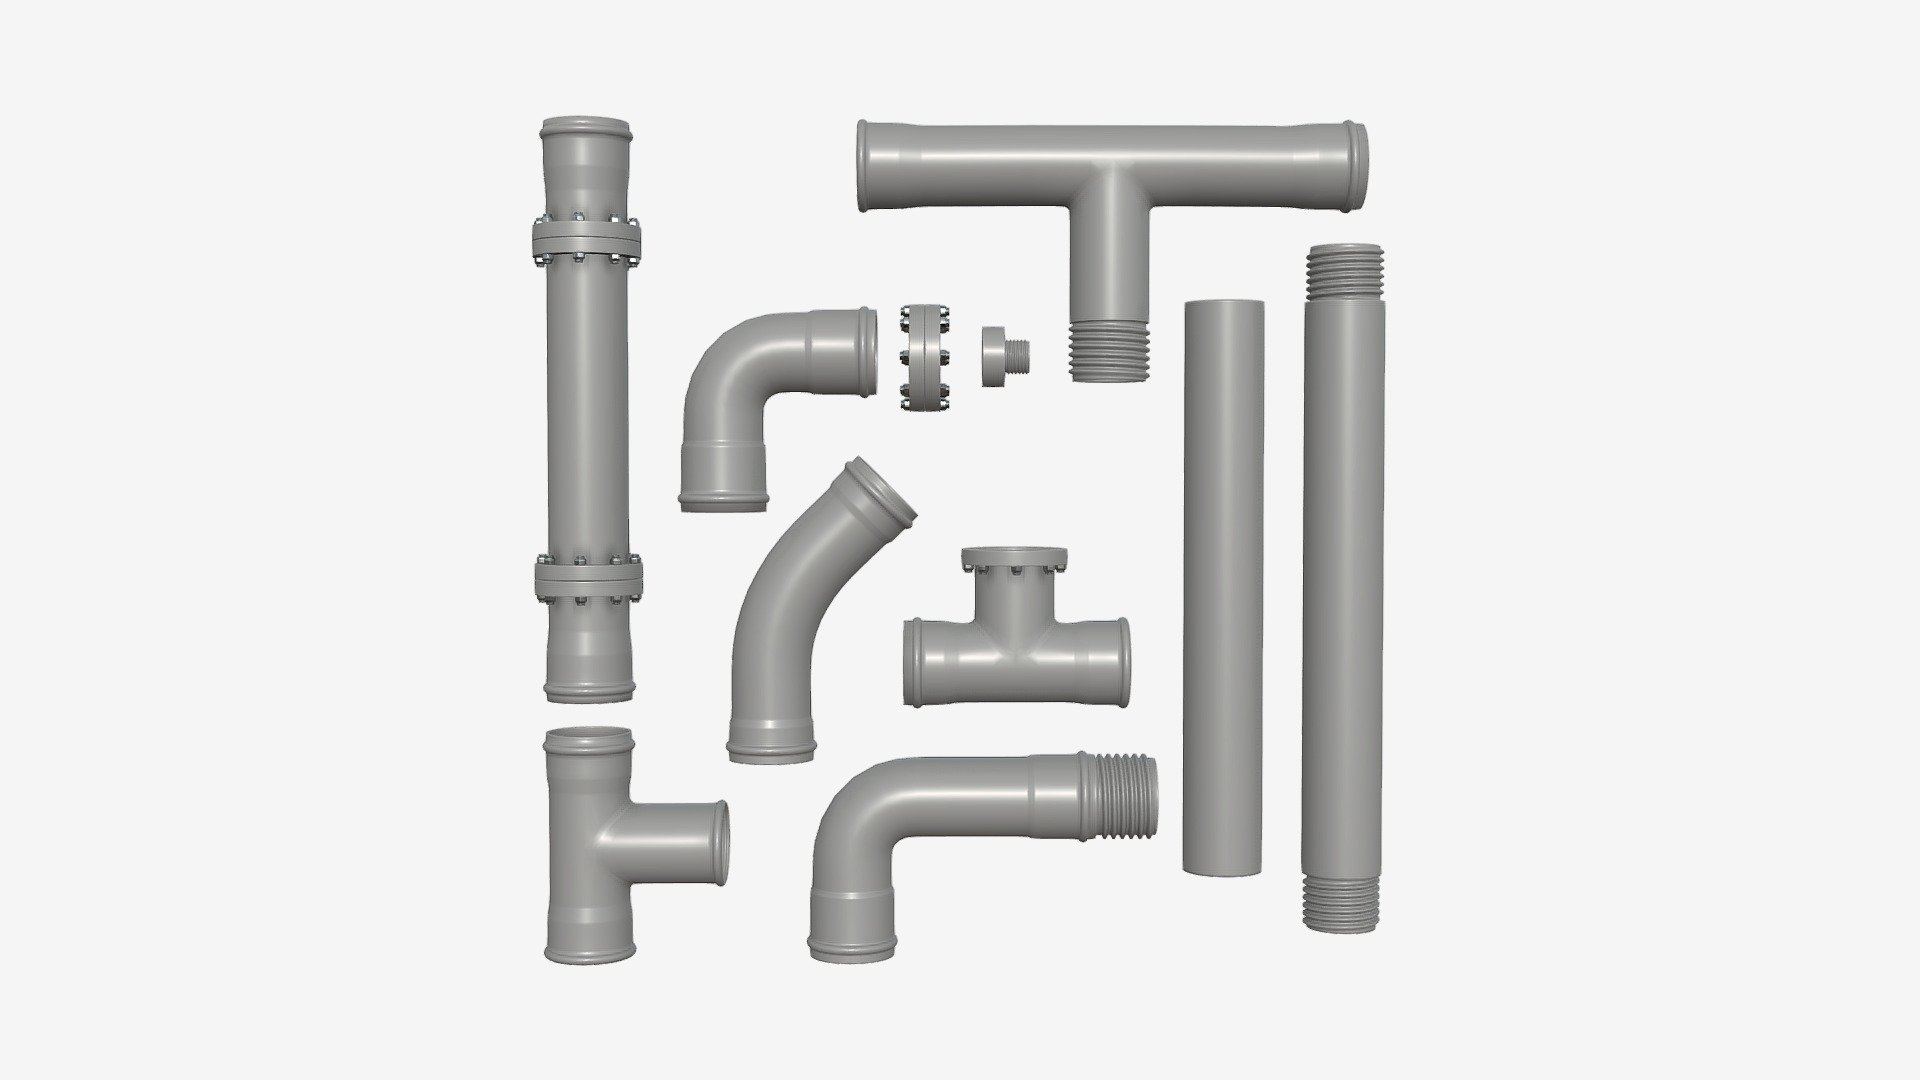 Plastic Pipes with Fittings Set - Buy Royalty Free 3D model by HQ3DMOD (@AivisAstics) 3d model